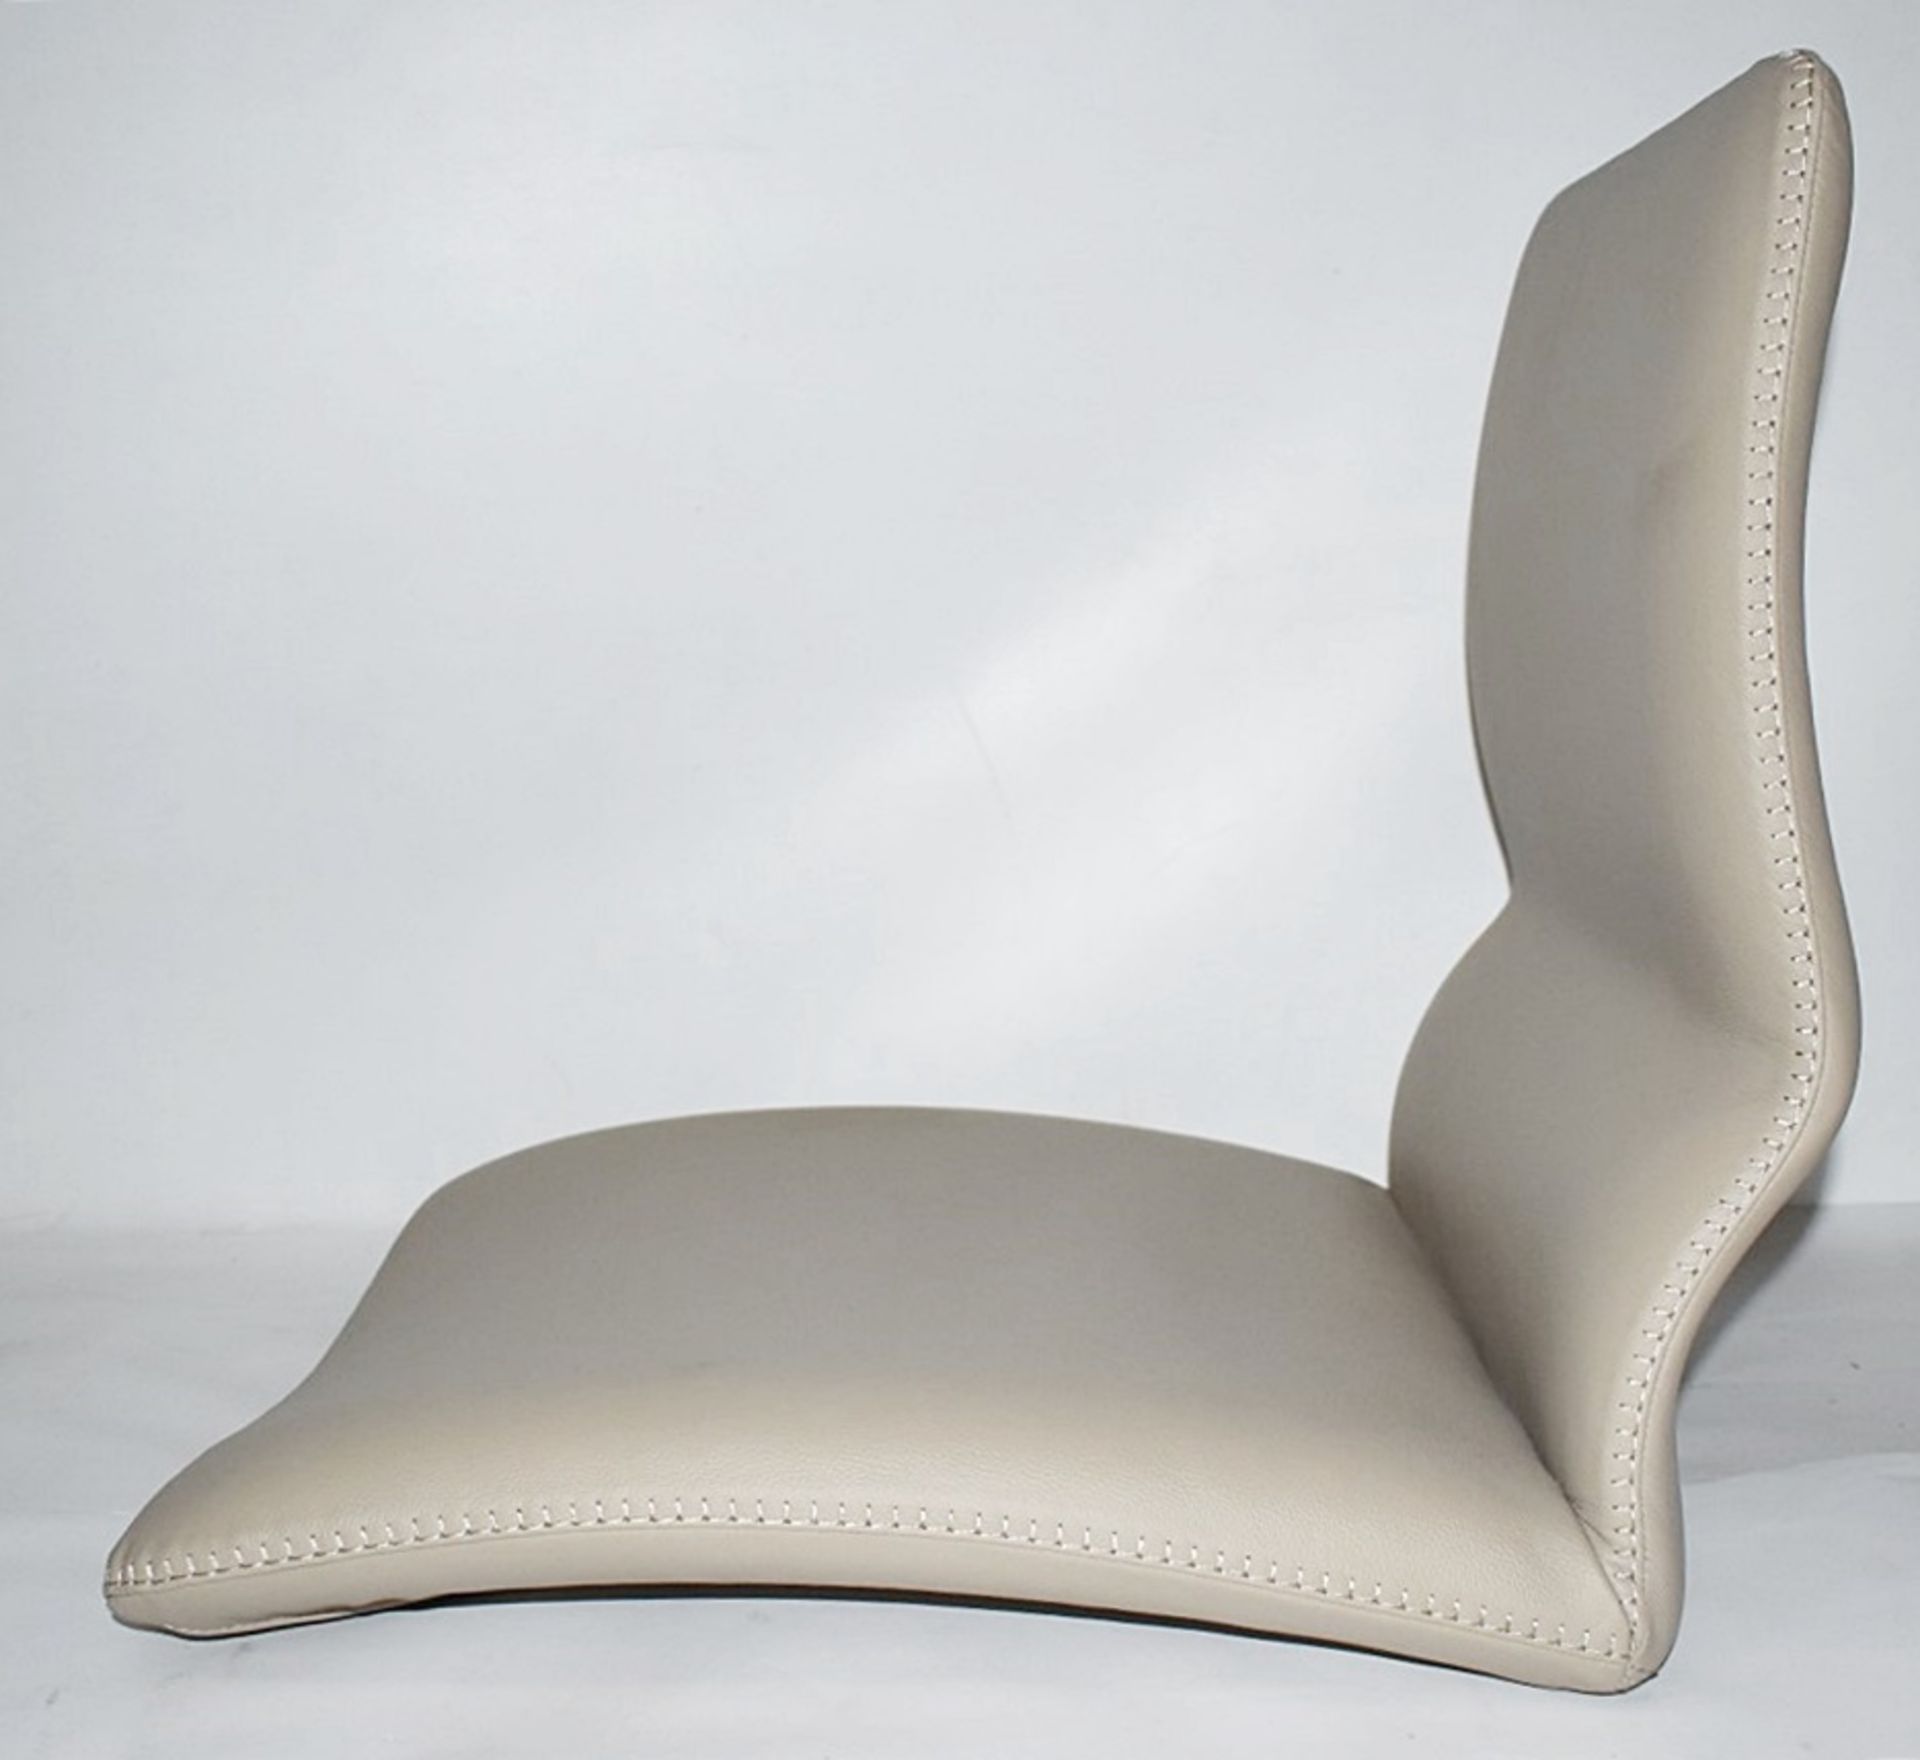 1 x CATTELAN ITALIA 'Vita' Leather Upholstered Swivel Office Chair (Seat Only) - Colour: Fawn - Image 3 of 9